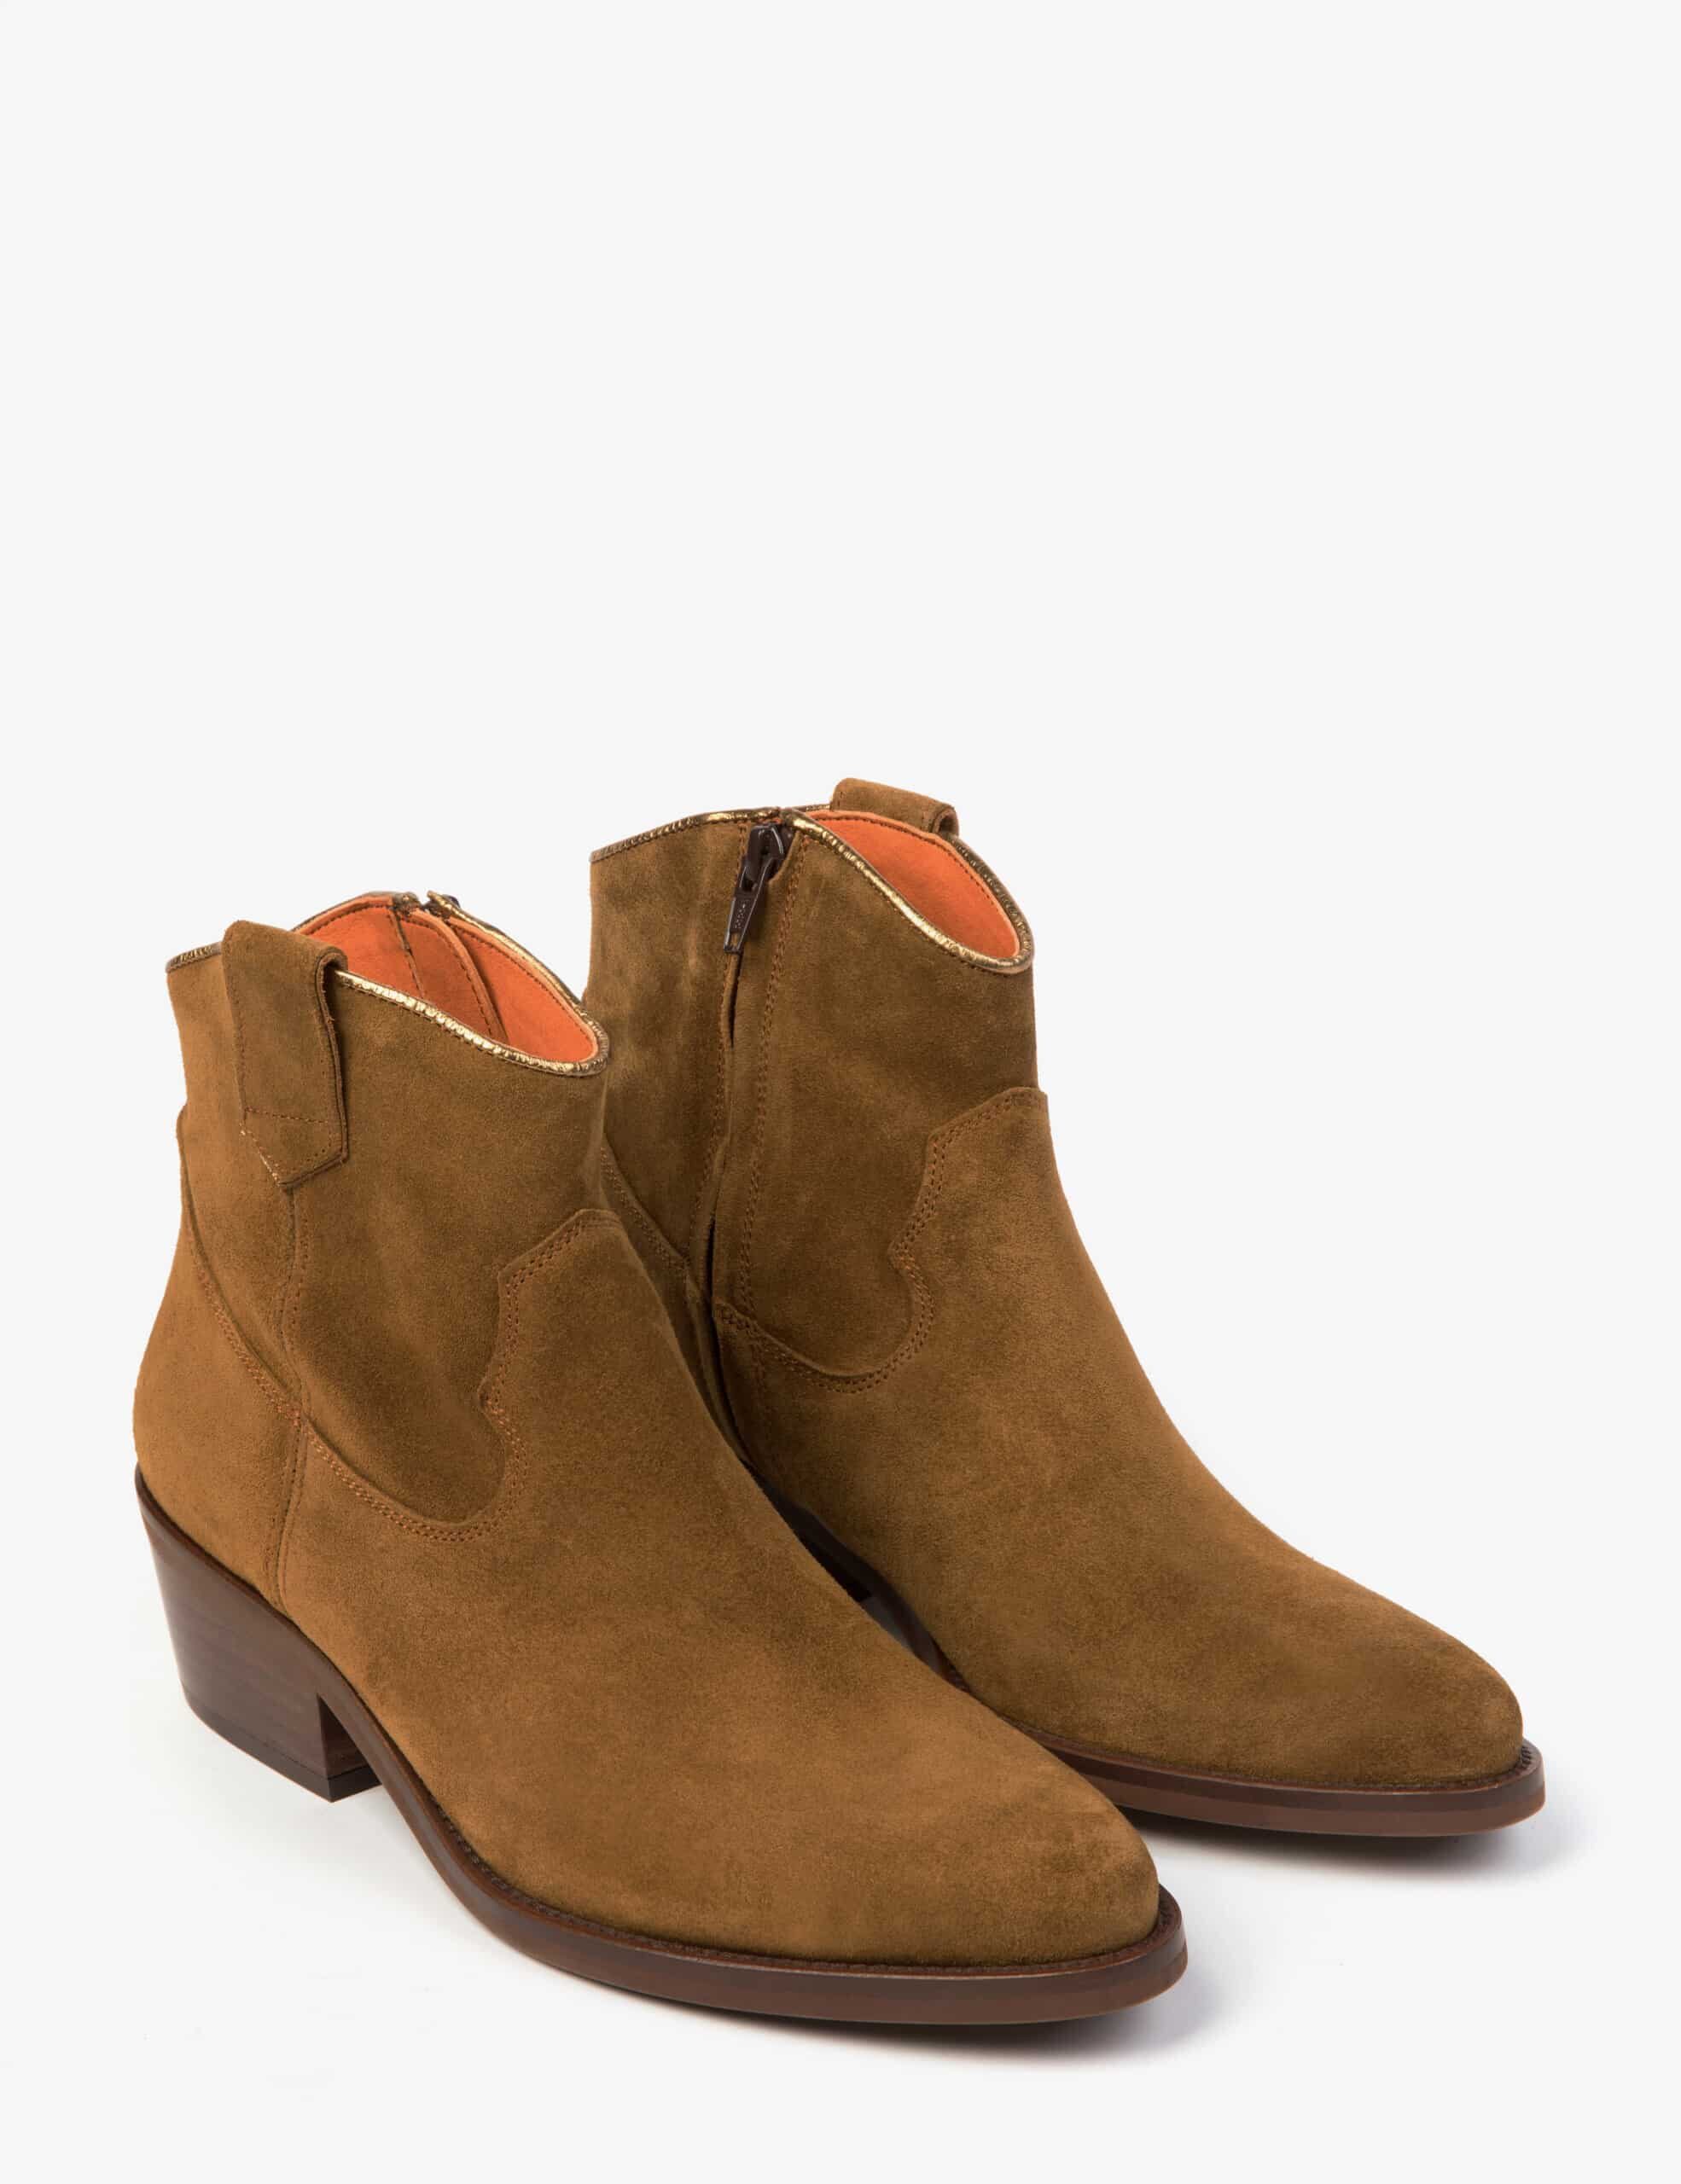 Cassidy Cowboy Boot – Tan Suede